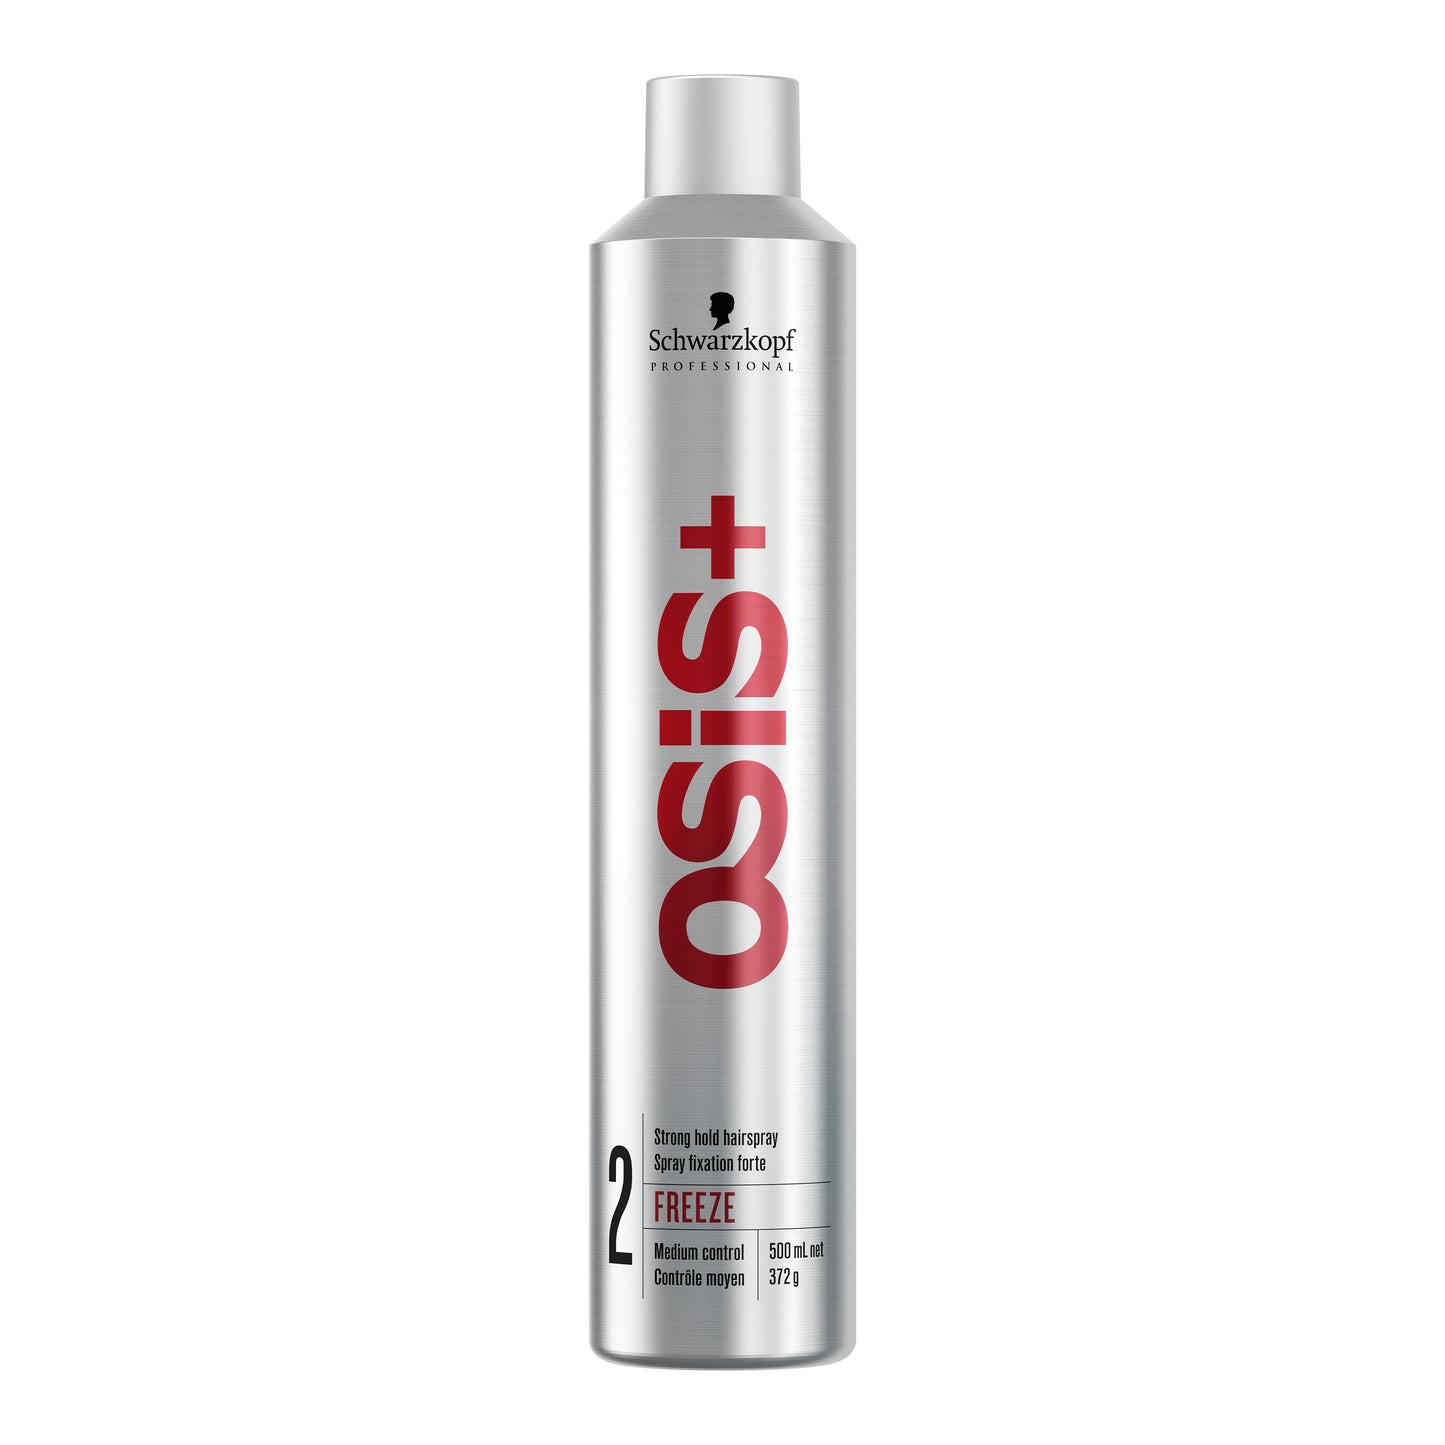 OSiS+ FREEZE XXL Strong Hold Hairspray | Level 2 Hold, Medium Control, 500mL